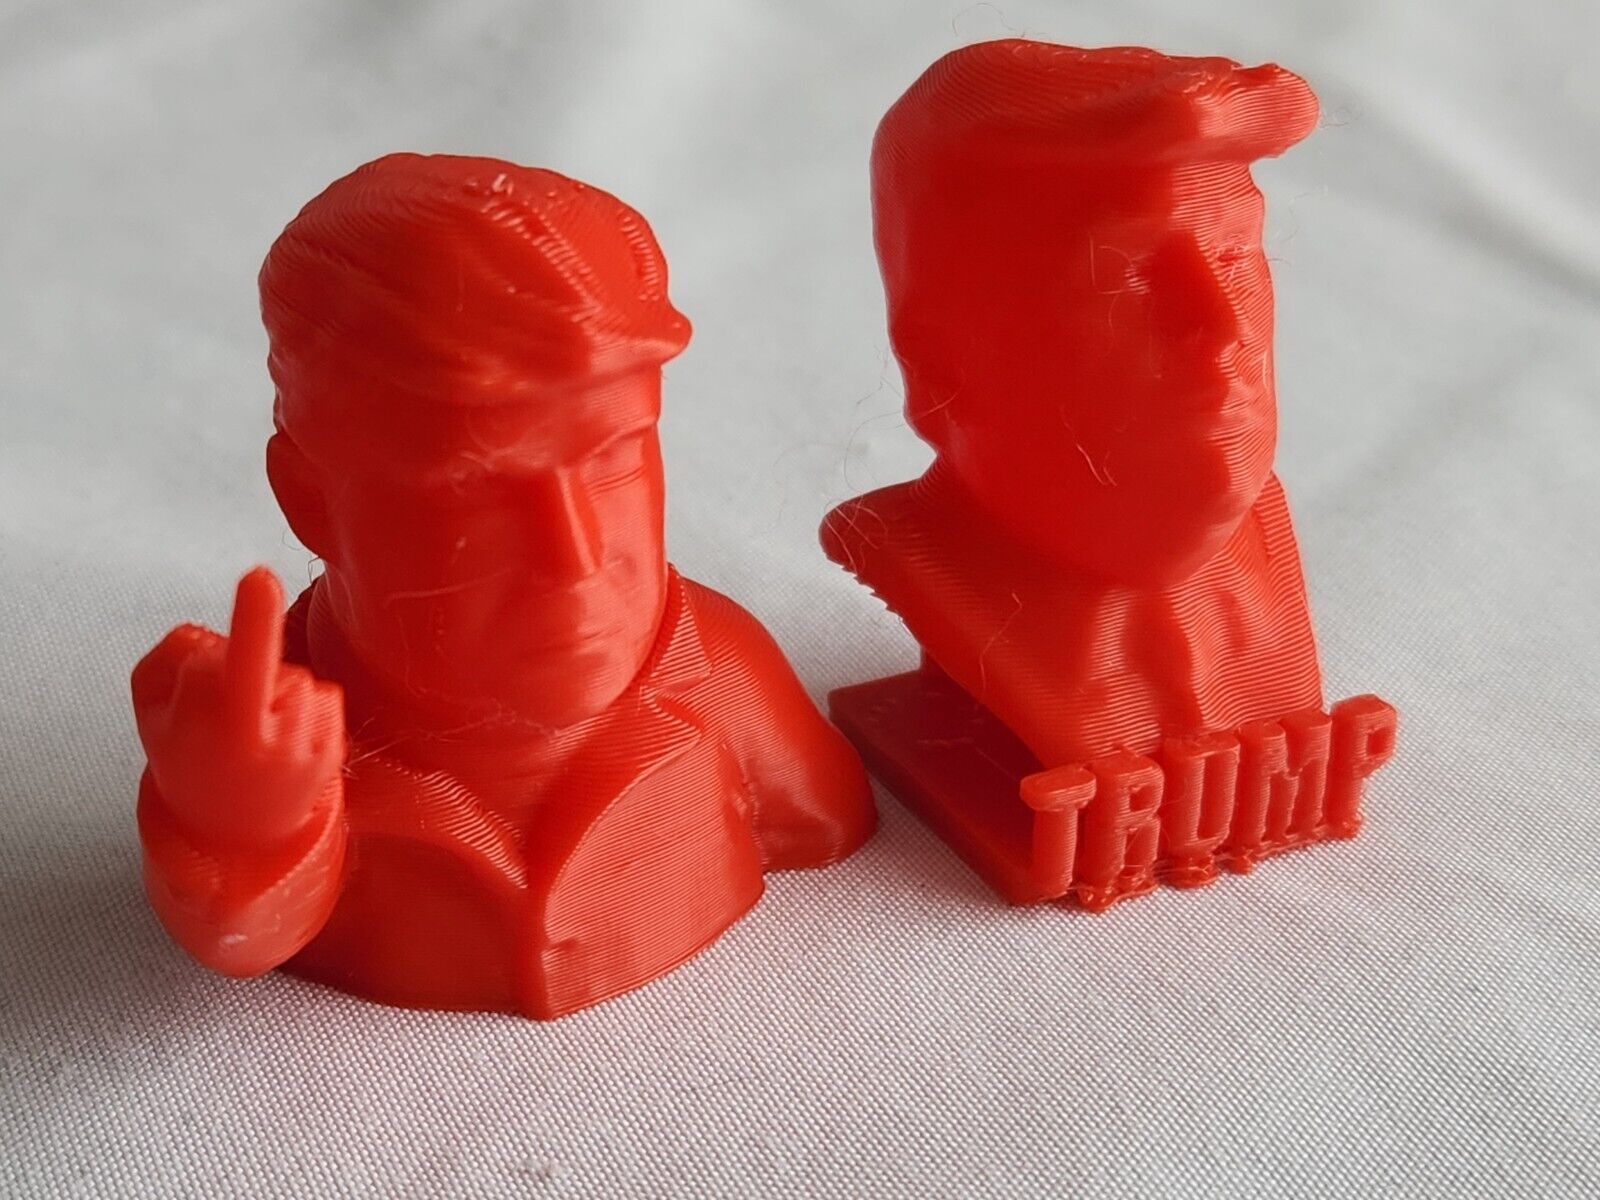 Mini Trumps These Trumps may be small in size but  big with message 6 Pack